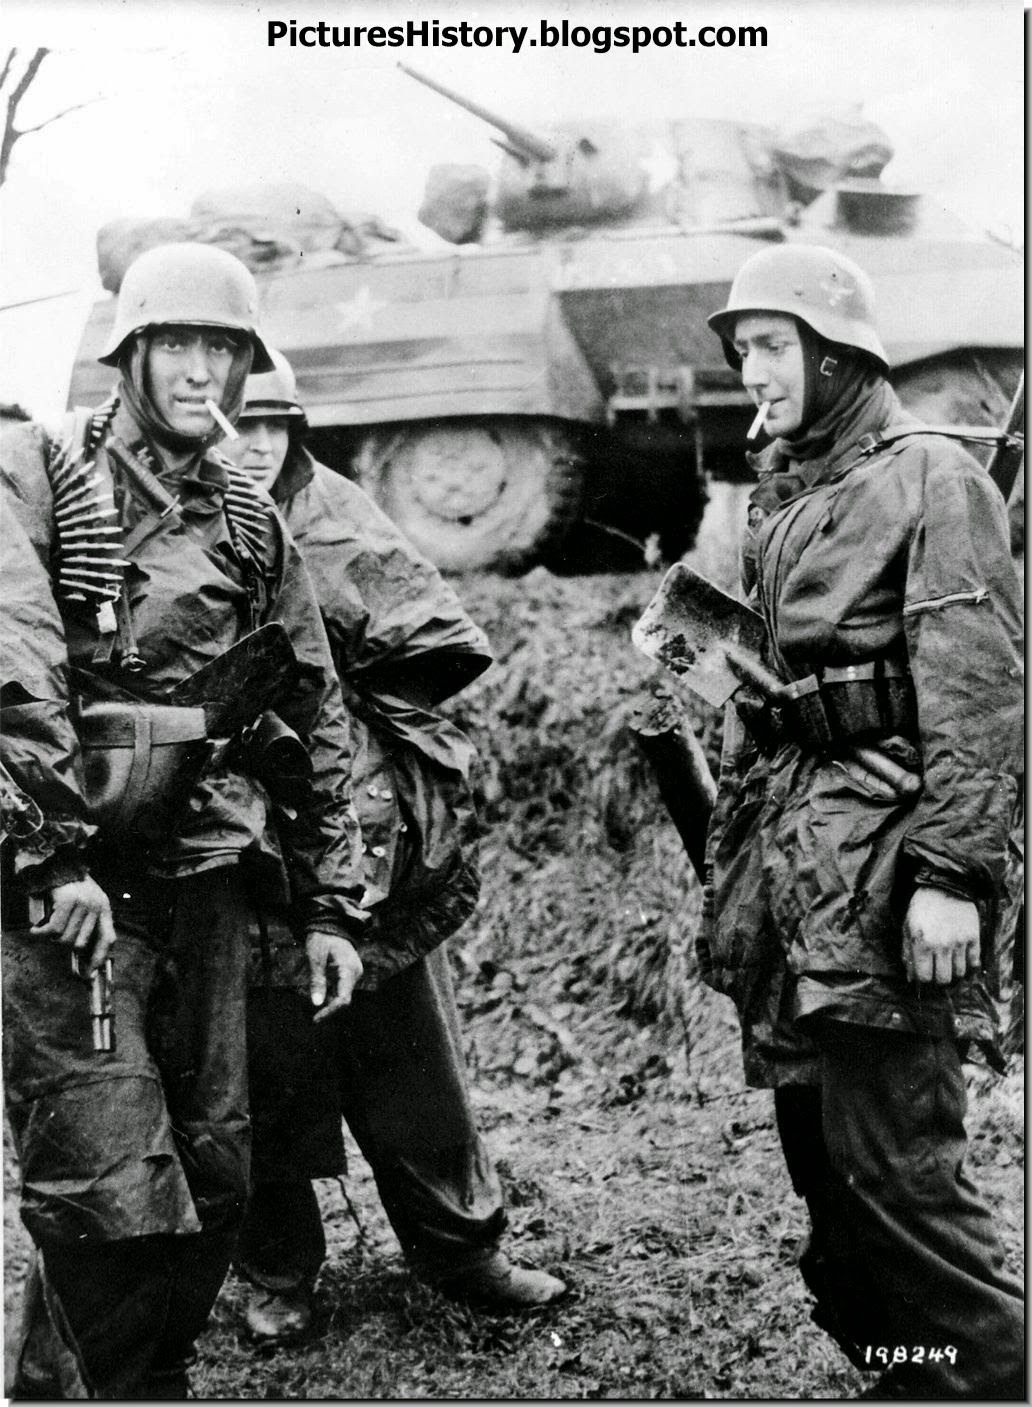 Waffen SS soldiers Poteau belgium 1944